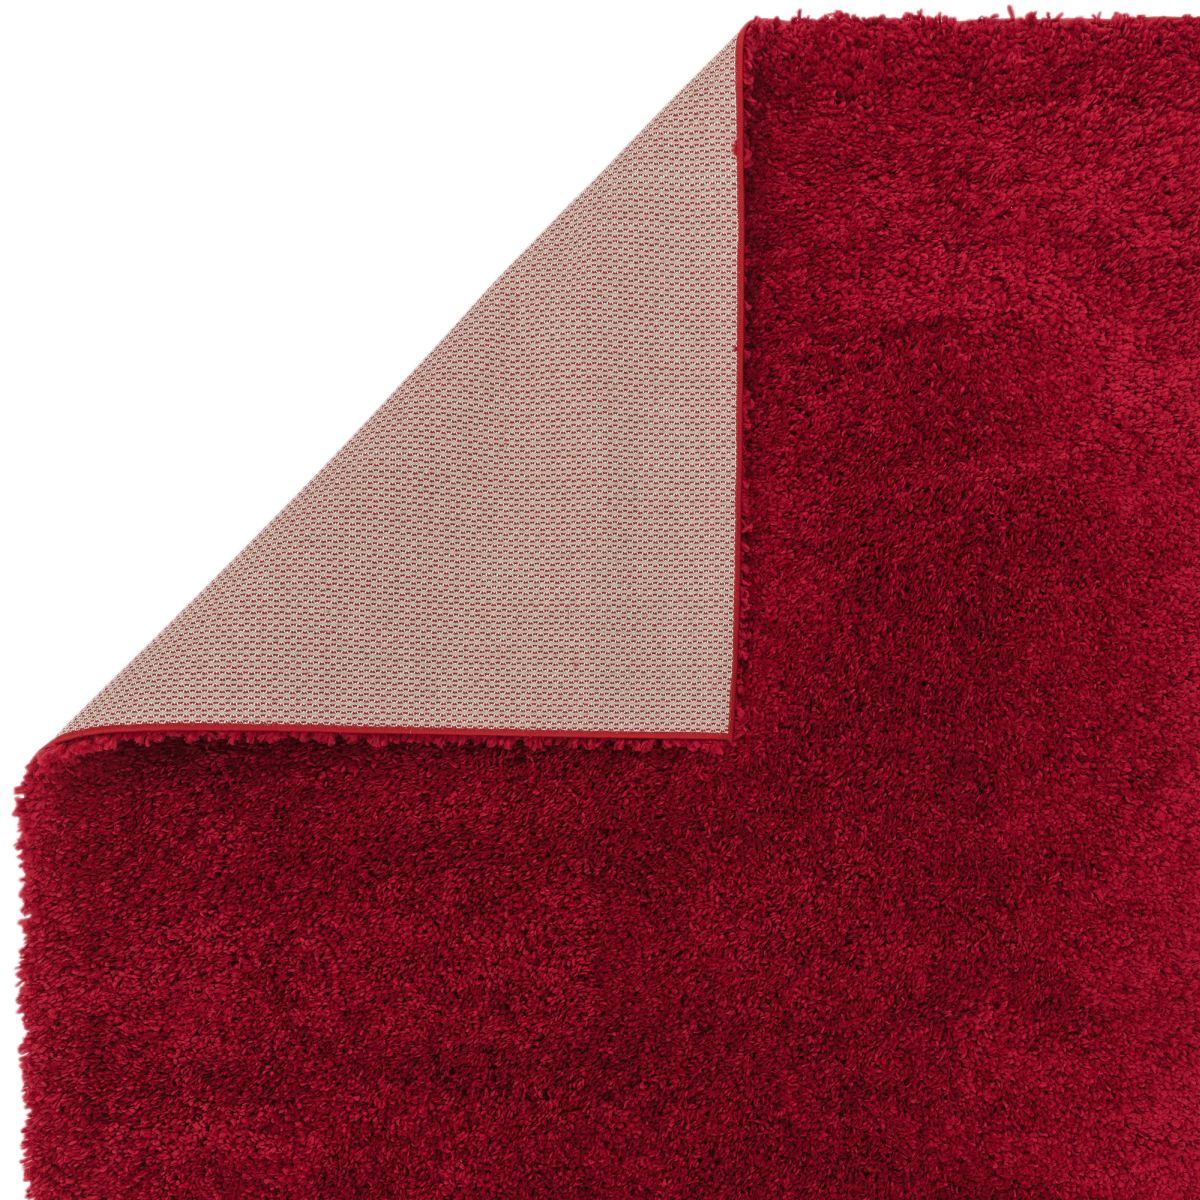 Ritchie Chunky Shaggy Rug - Red